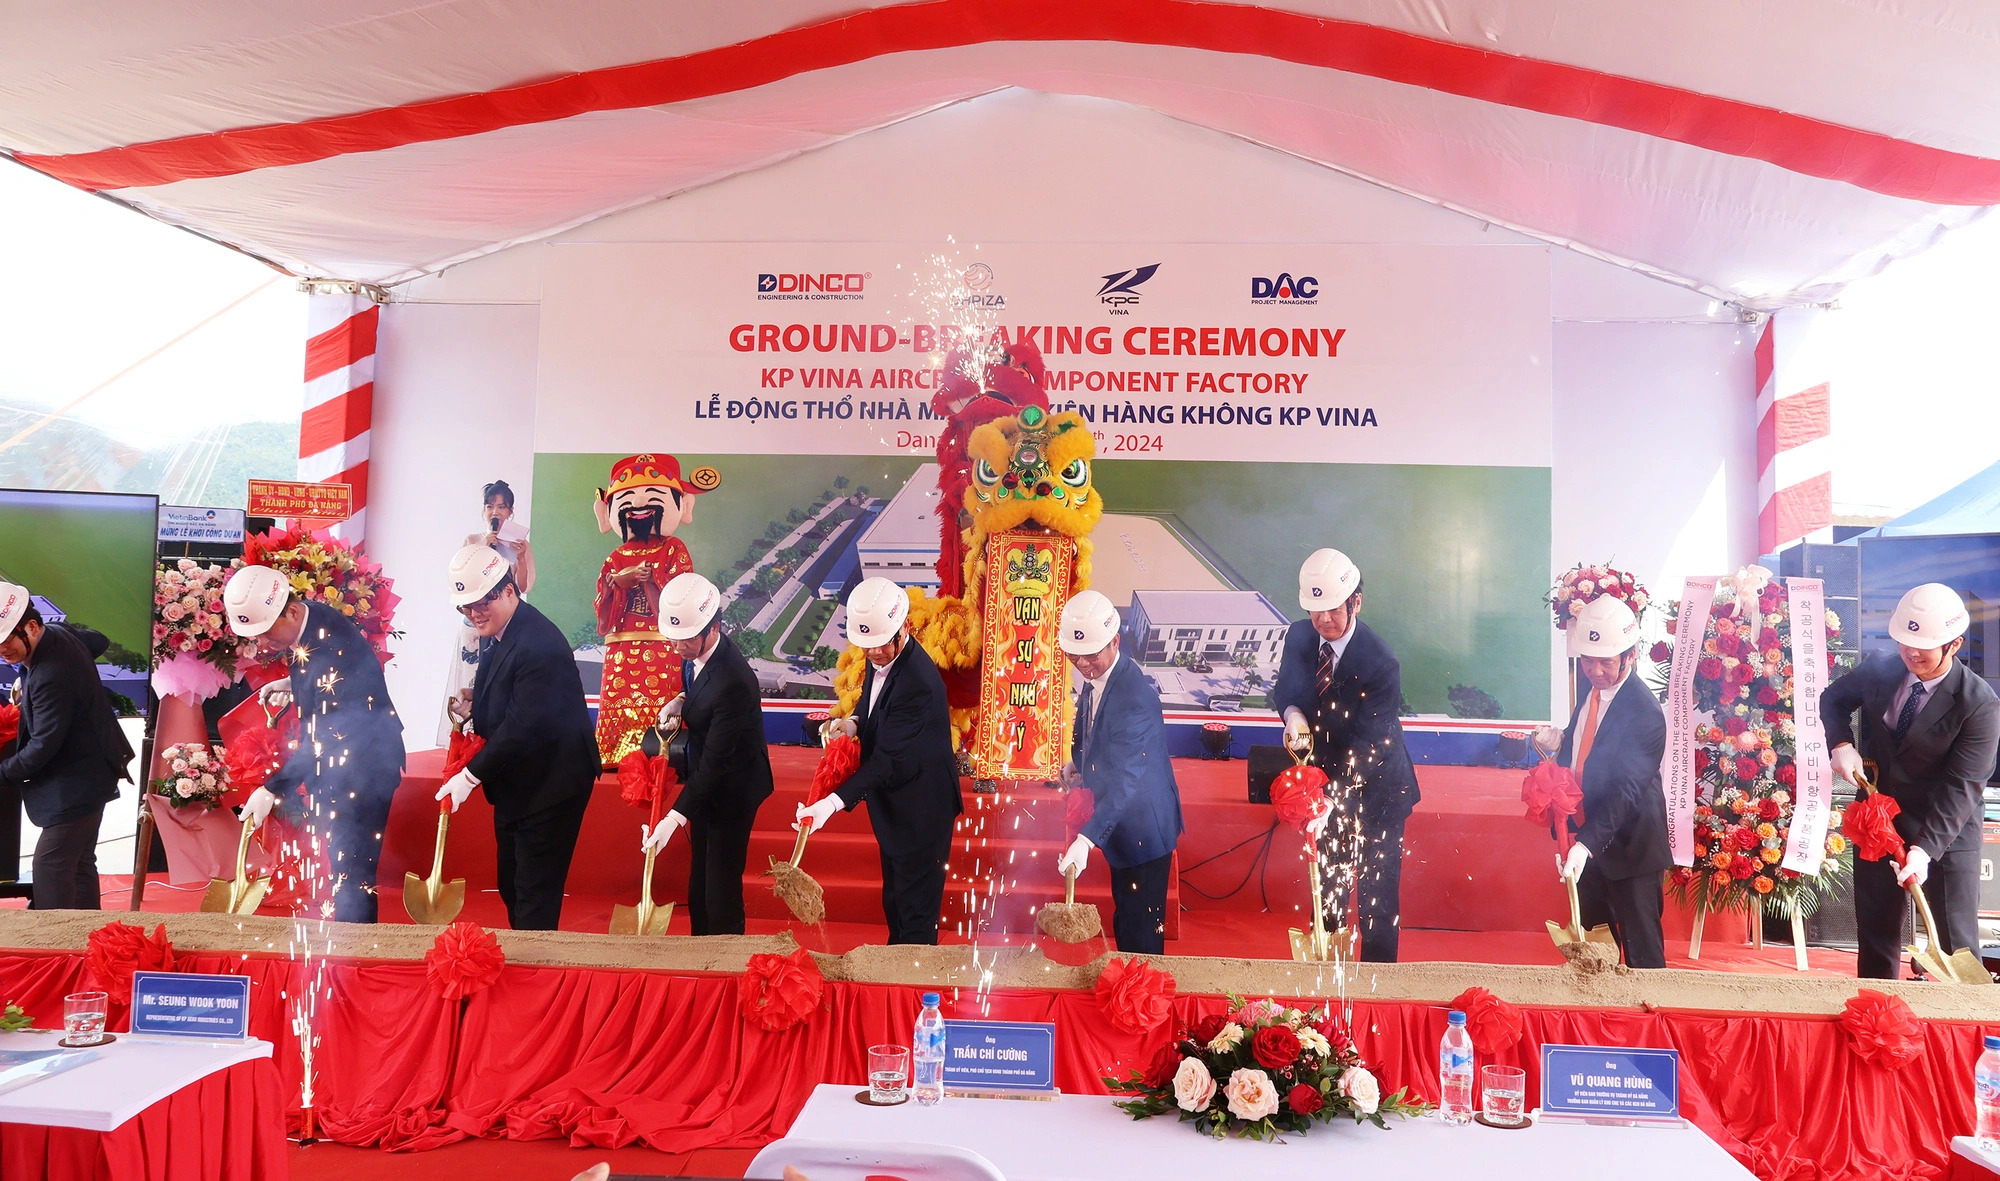 Delegates attend a ground-breaking ceremony of the KP Vina Aircraft Component factory project, located at Da Nang Hi-Tech Park, Da Nang City, central Vietnam, January 30, 2024. Photo: Le Trung / Tuoi Tre